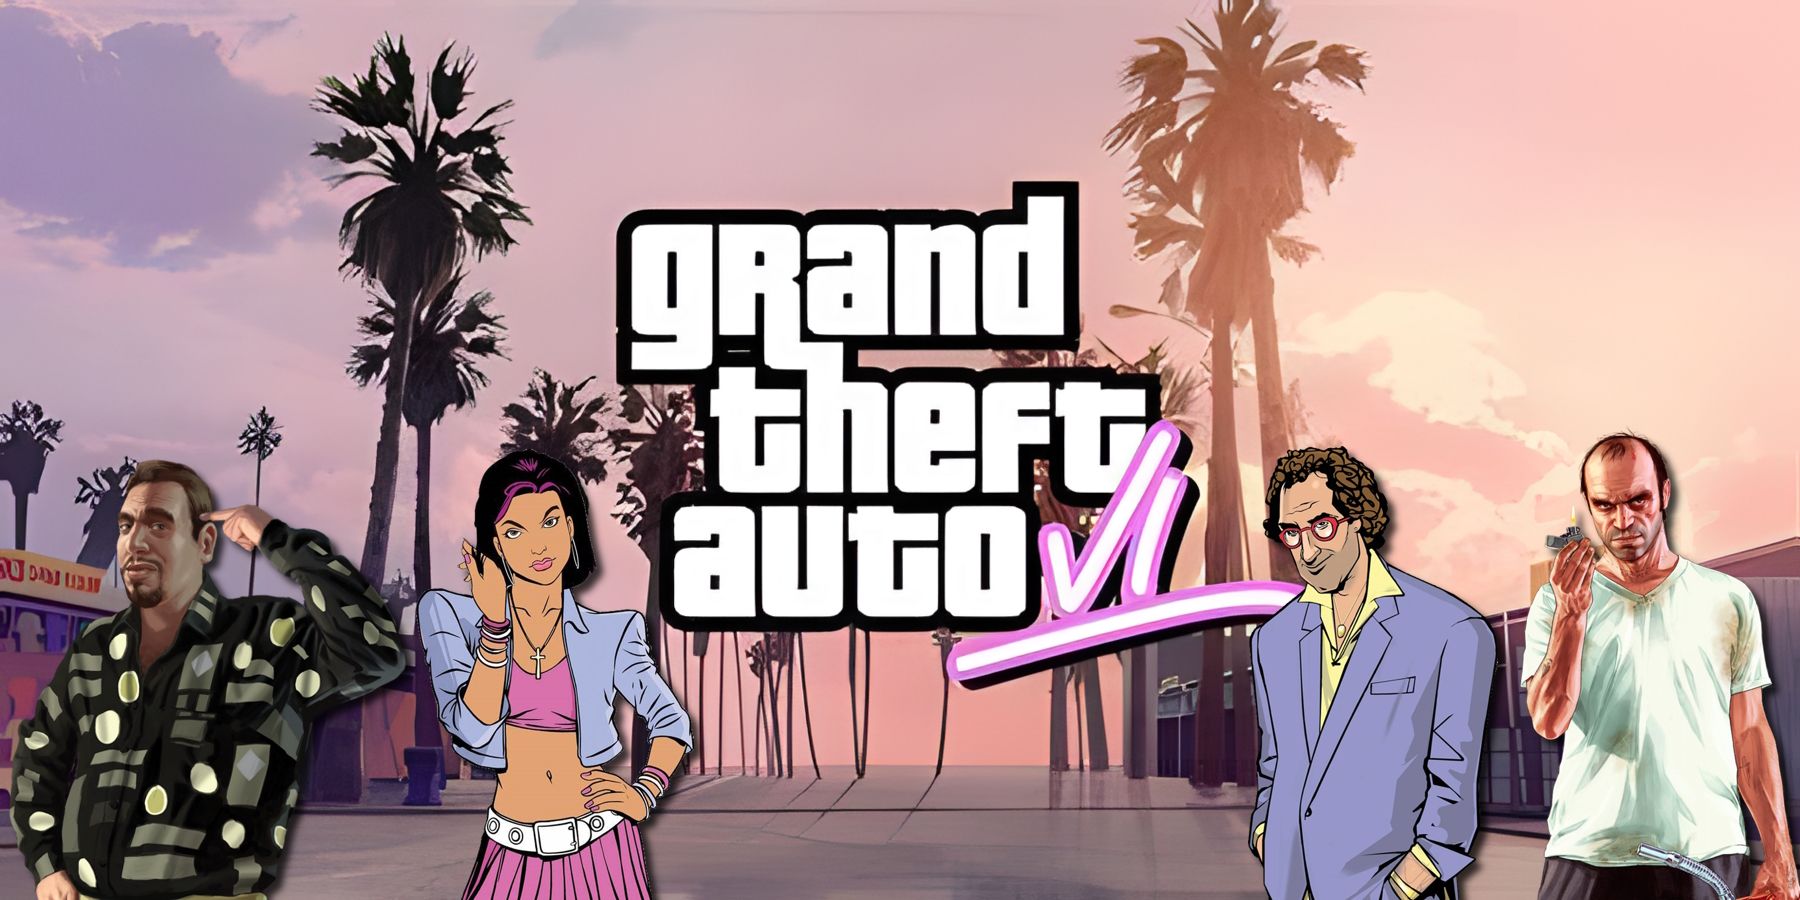 GTA 6 art with classic characters from GTA 4, GTA 5, and GTA Vice City